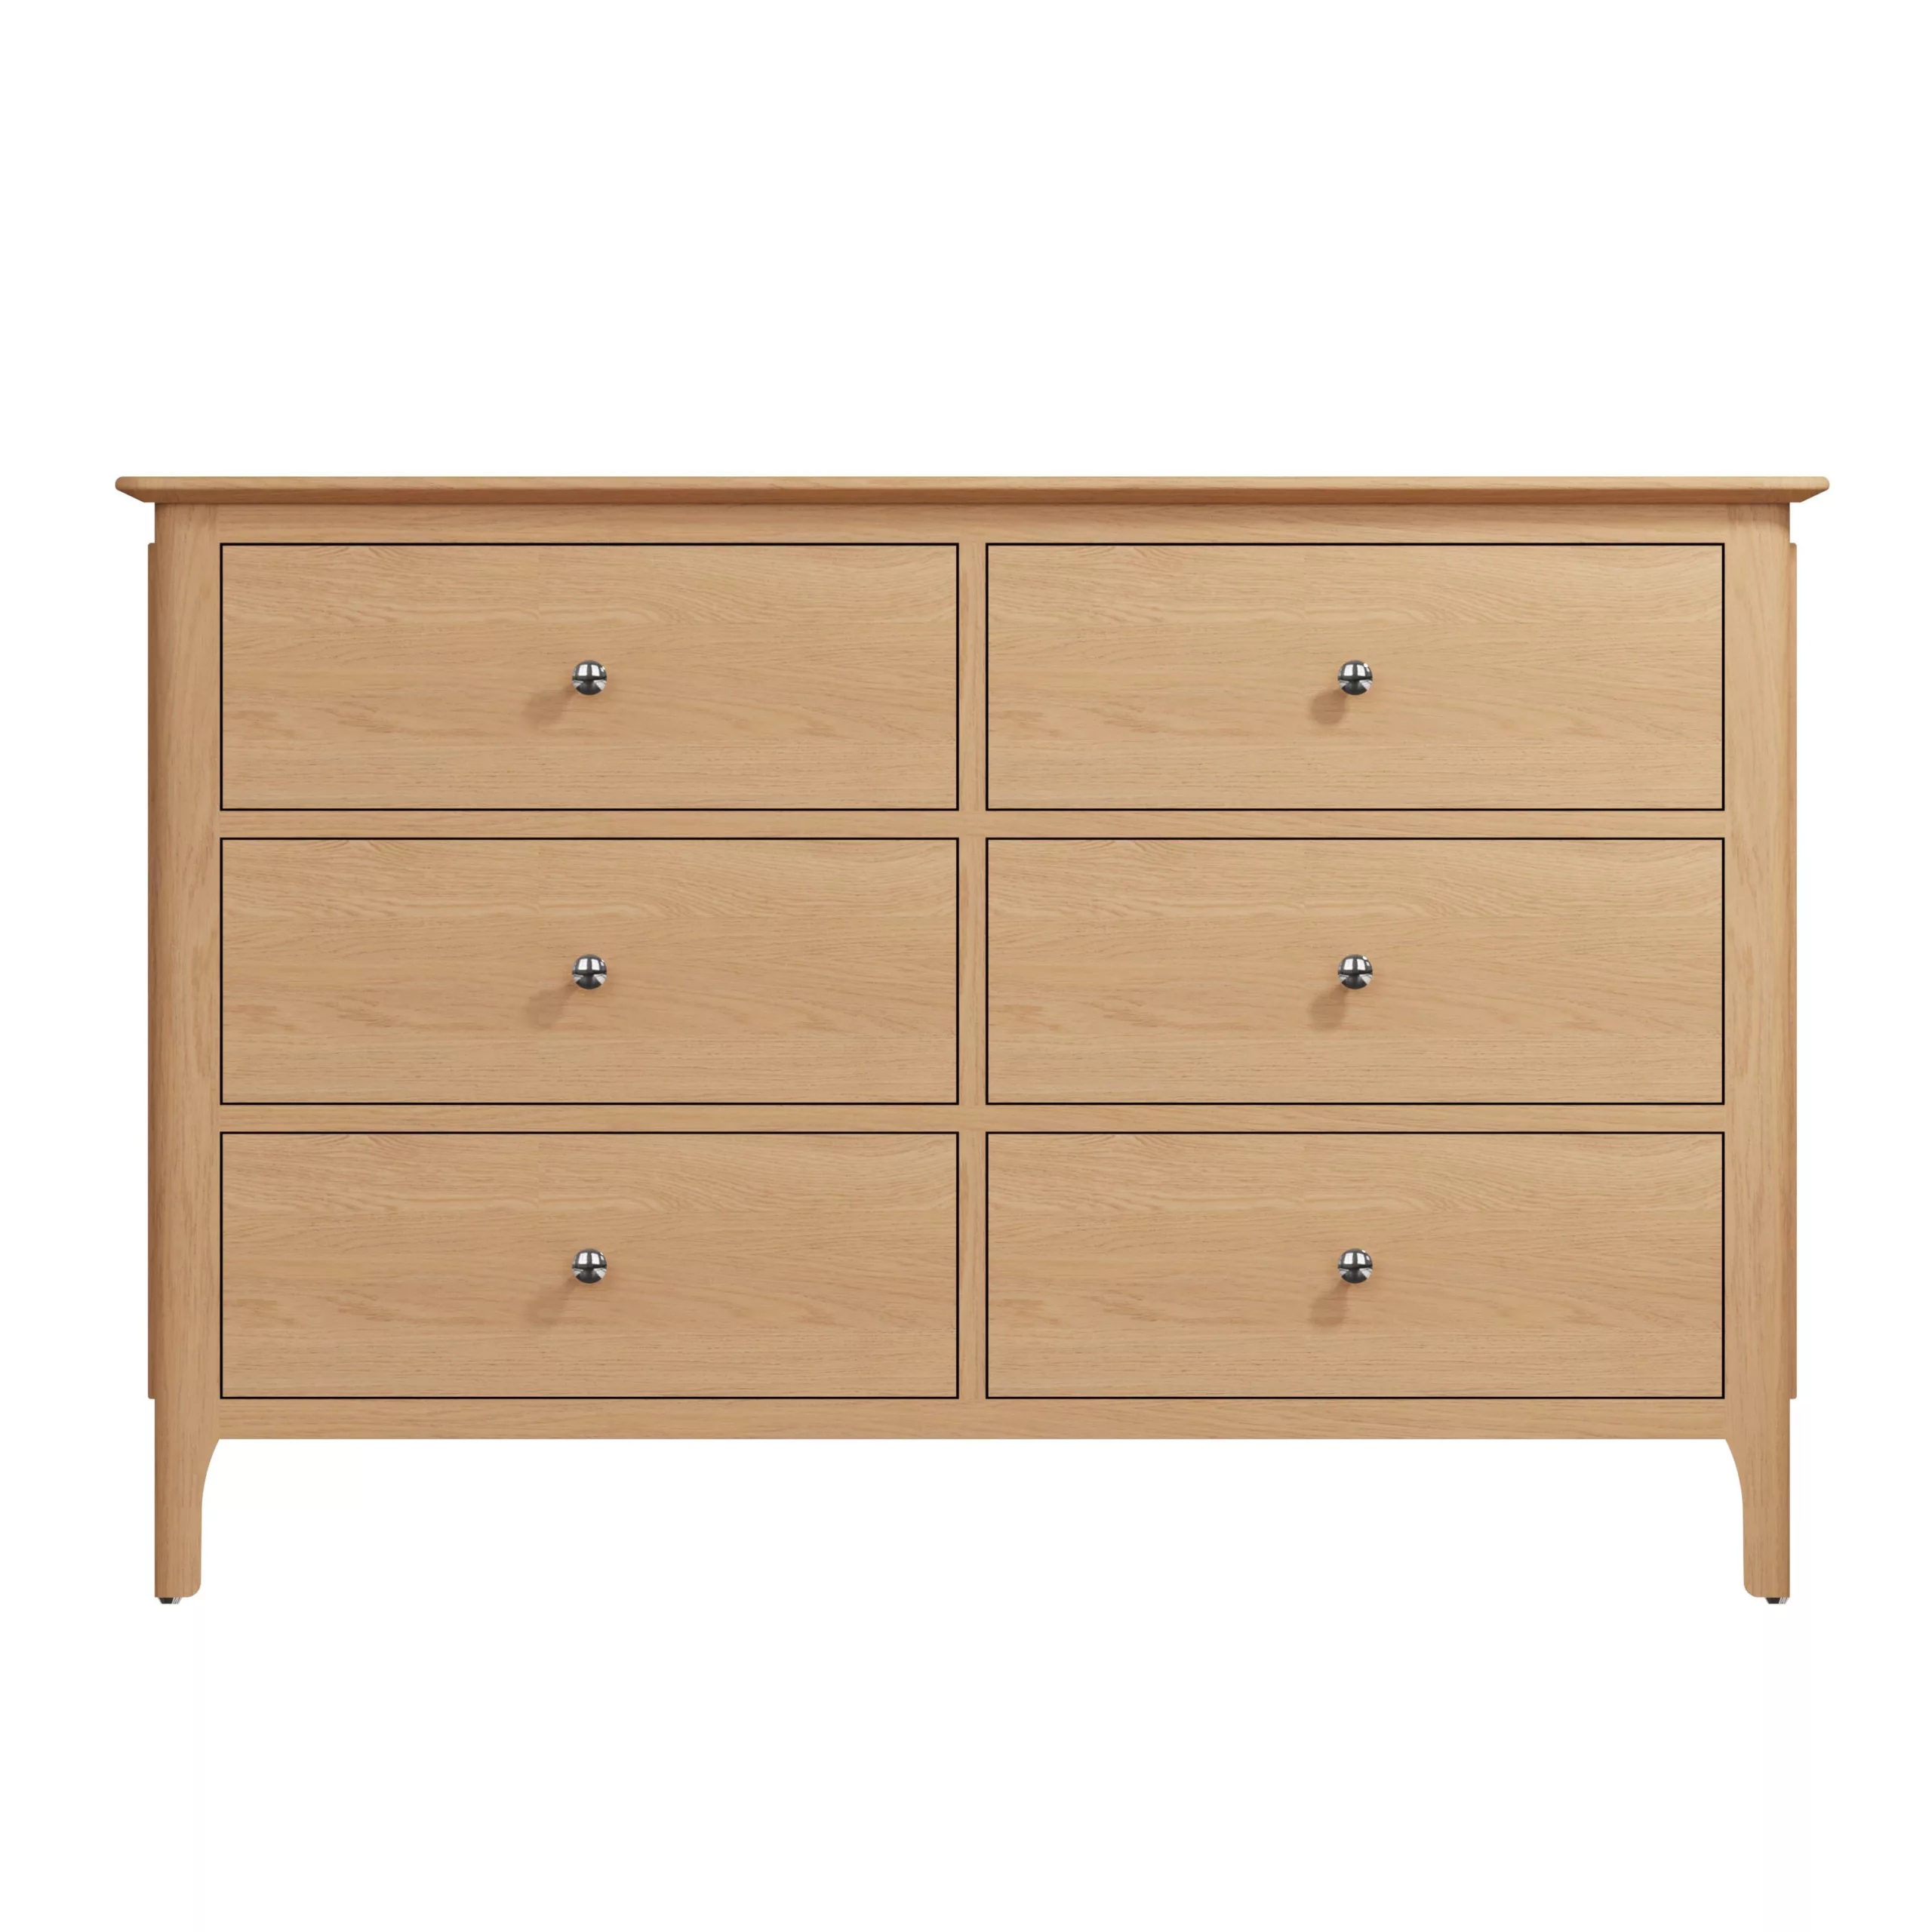 Woodley 6 Drawer Chest